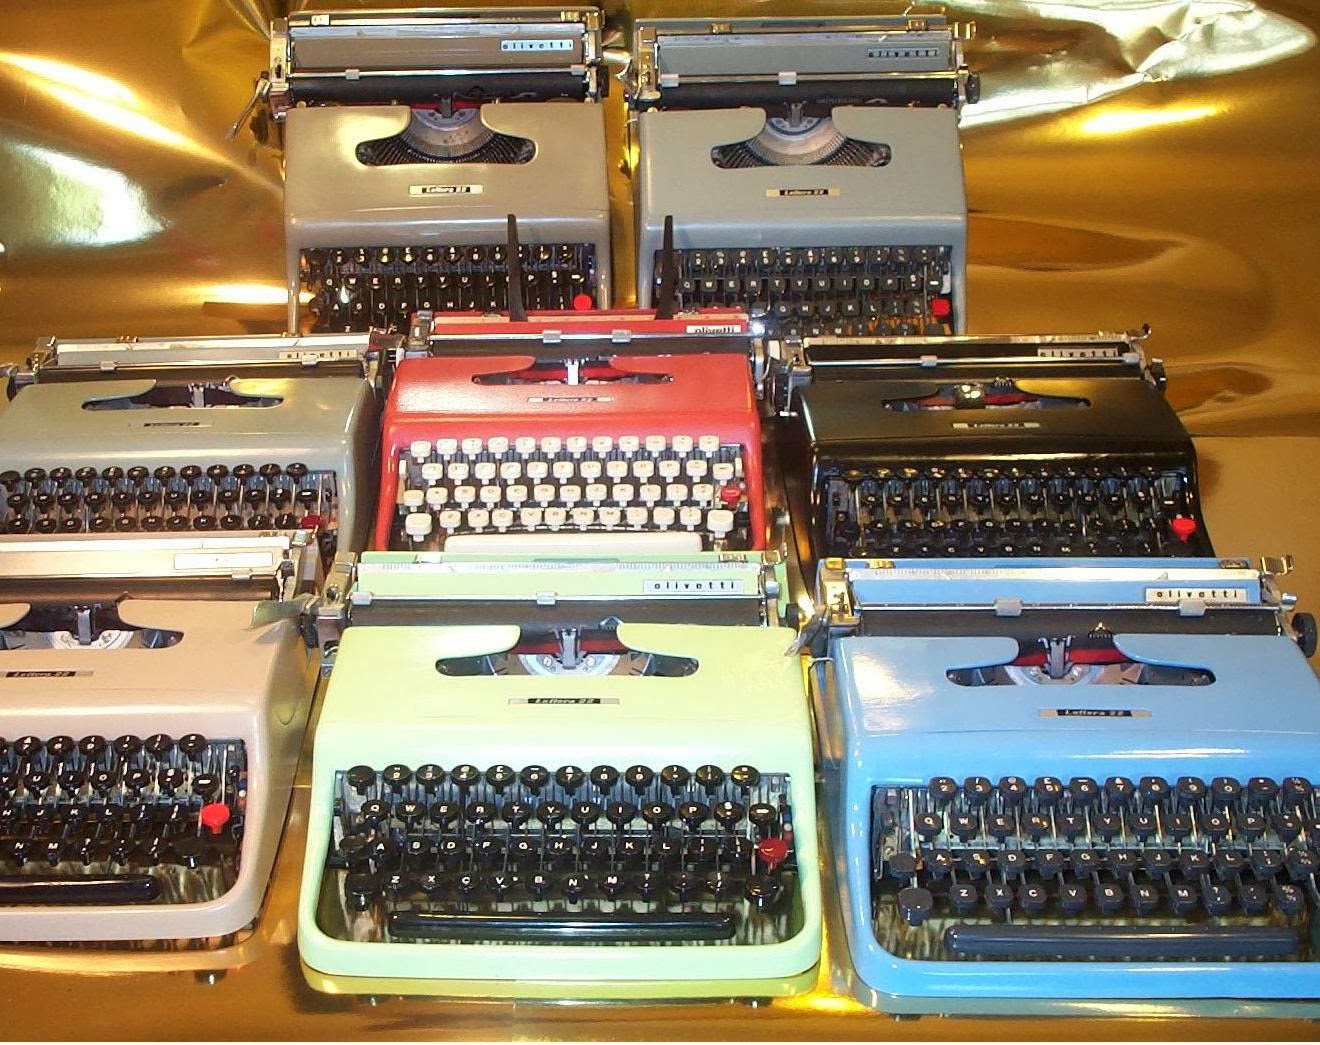 oz.Typewriter: Everything New in Portable Typewriters is Old Again